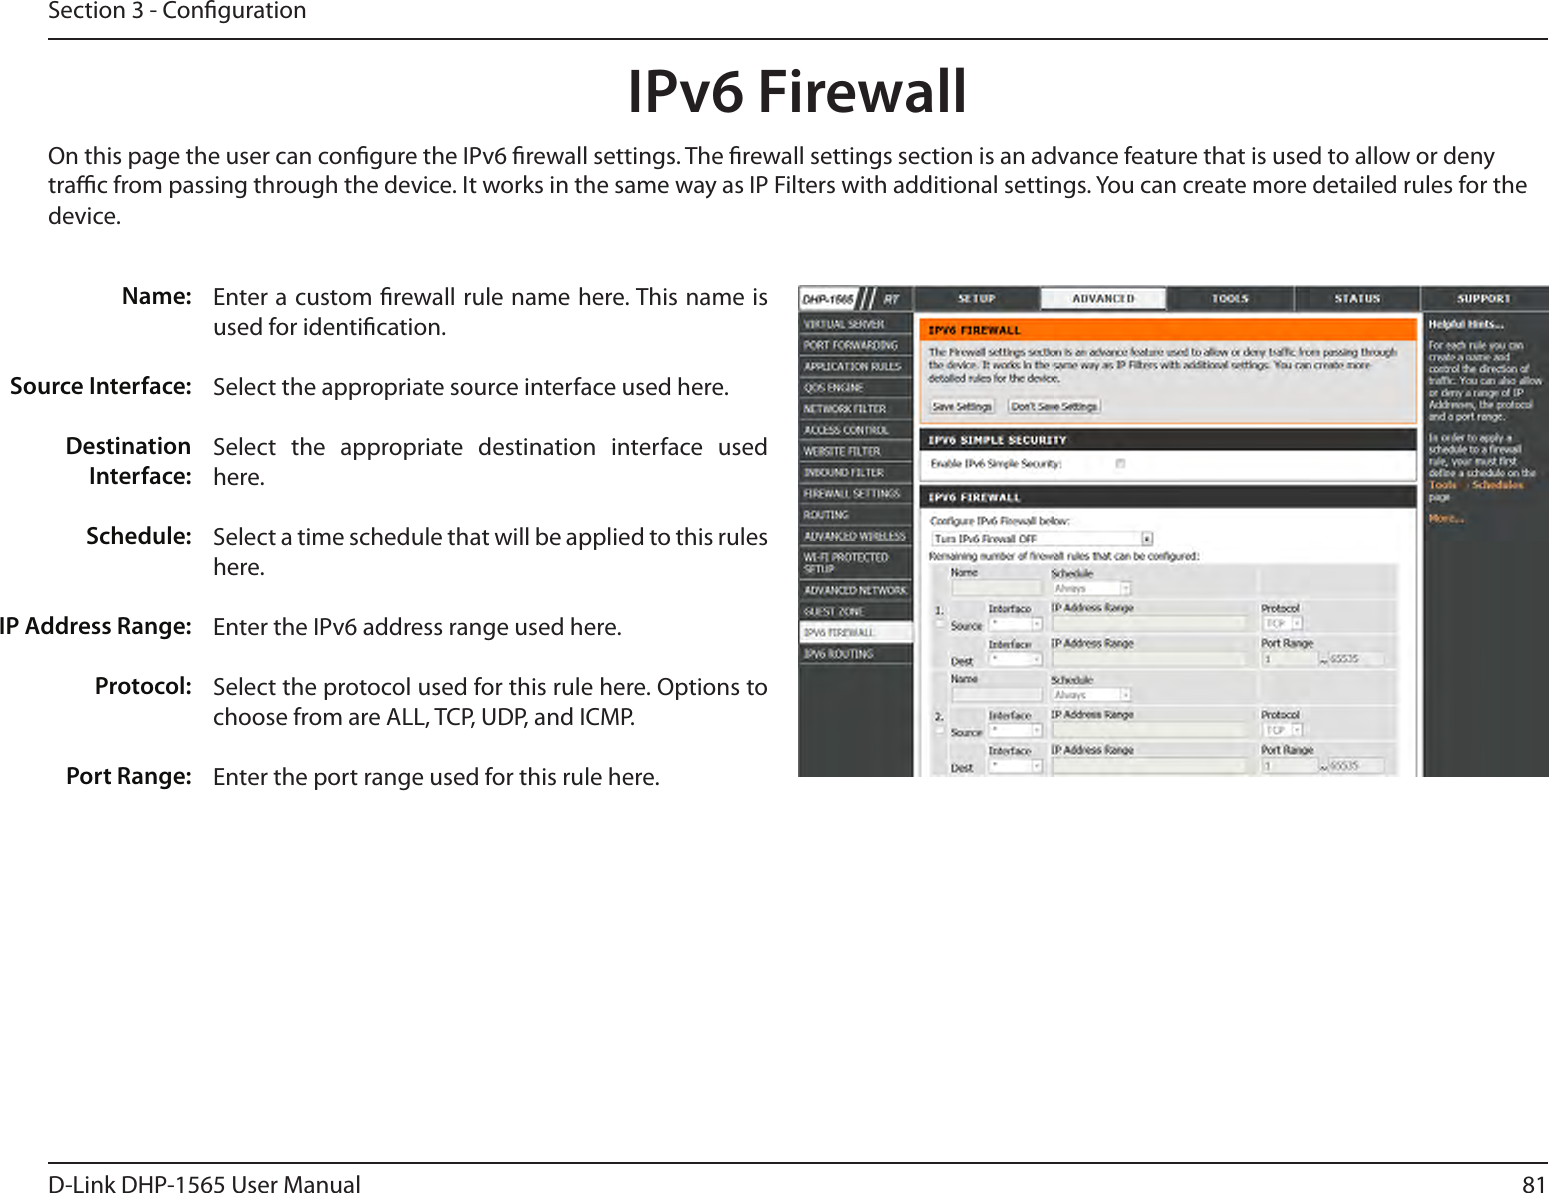 81D-Link DHP-1565 User ManualSection 3 - CongurationIPv6 FirewallOn this page the user can congure the IPv6 rewall settings. The rewall settings section is an advance feature that is used to allow or deny trac from passing through the device. It works in the same way as IP Filters with additional settings. You can create more detailed rules for the device.Name: Source Interface:Destination Interface:Schedule:IP Address Range:Protocol:Port Range:Enter a custom rewall rule name here. This name is used for identication.Select the appropriate source interface used here.Select  the  appropriate  destination  interface  used here.Select a time schedule that will be applied to this rules here.Enter the IPv6 address range used here.Select the protocol used for this rule here. Options to choose from are ALL, TCP, UDP, and ICMP.Enter the port range used for this rule here.